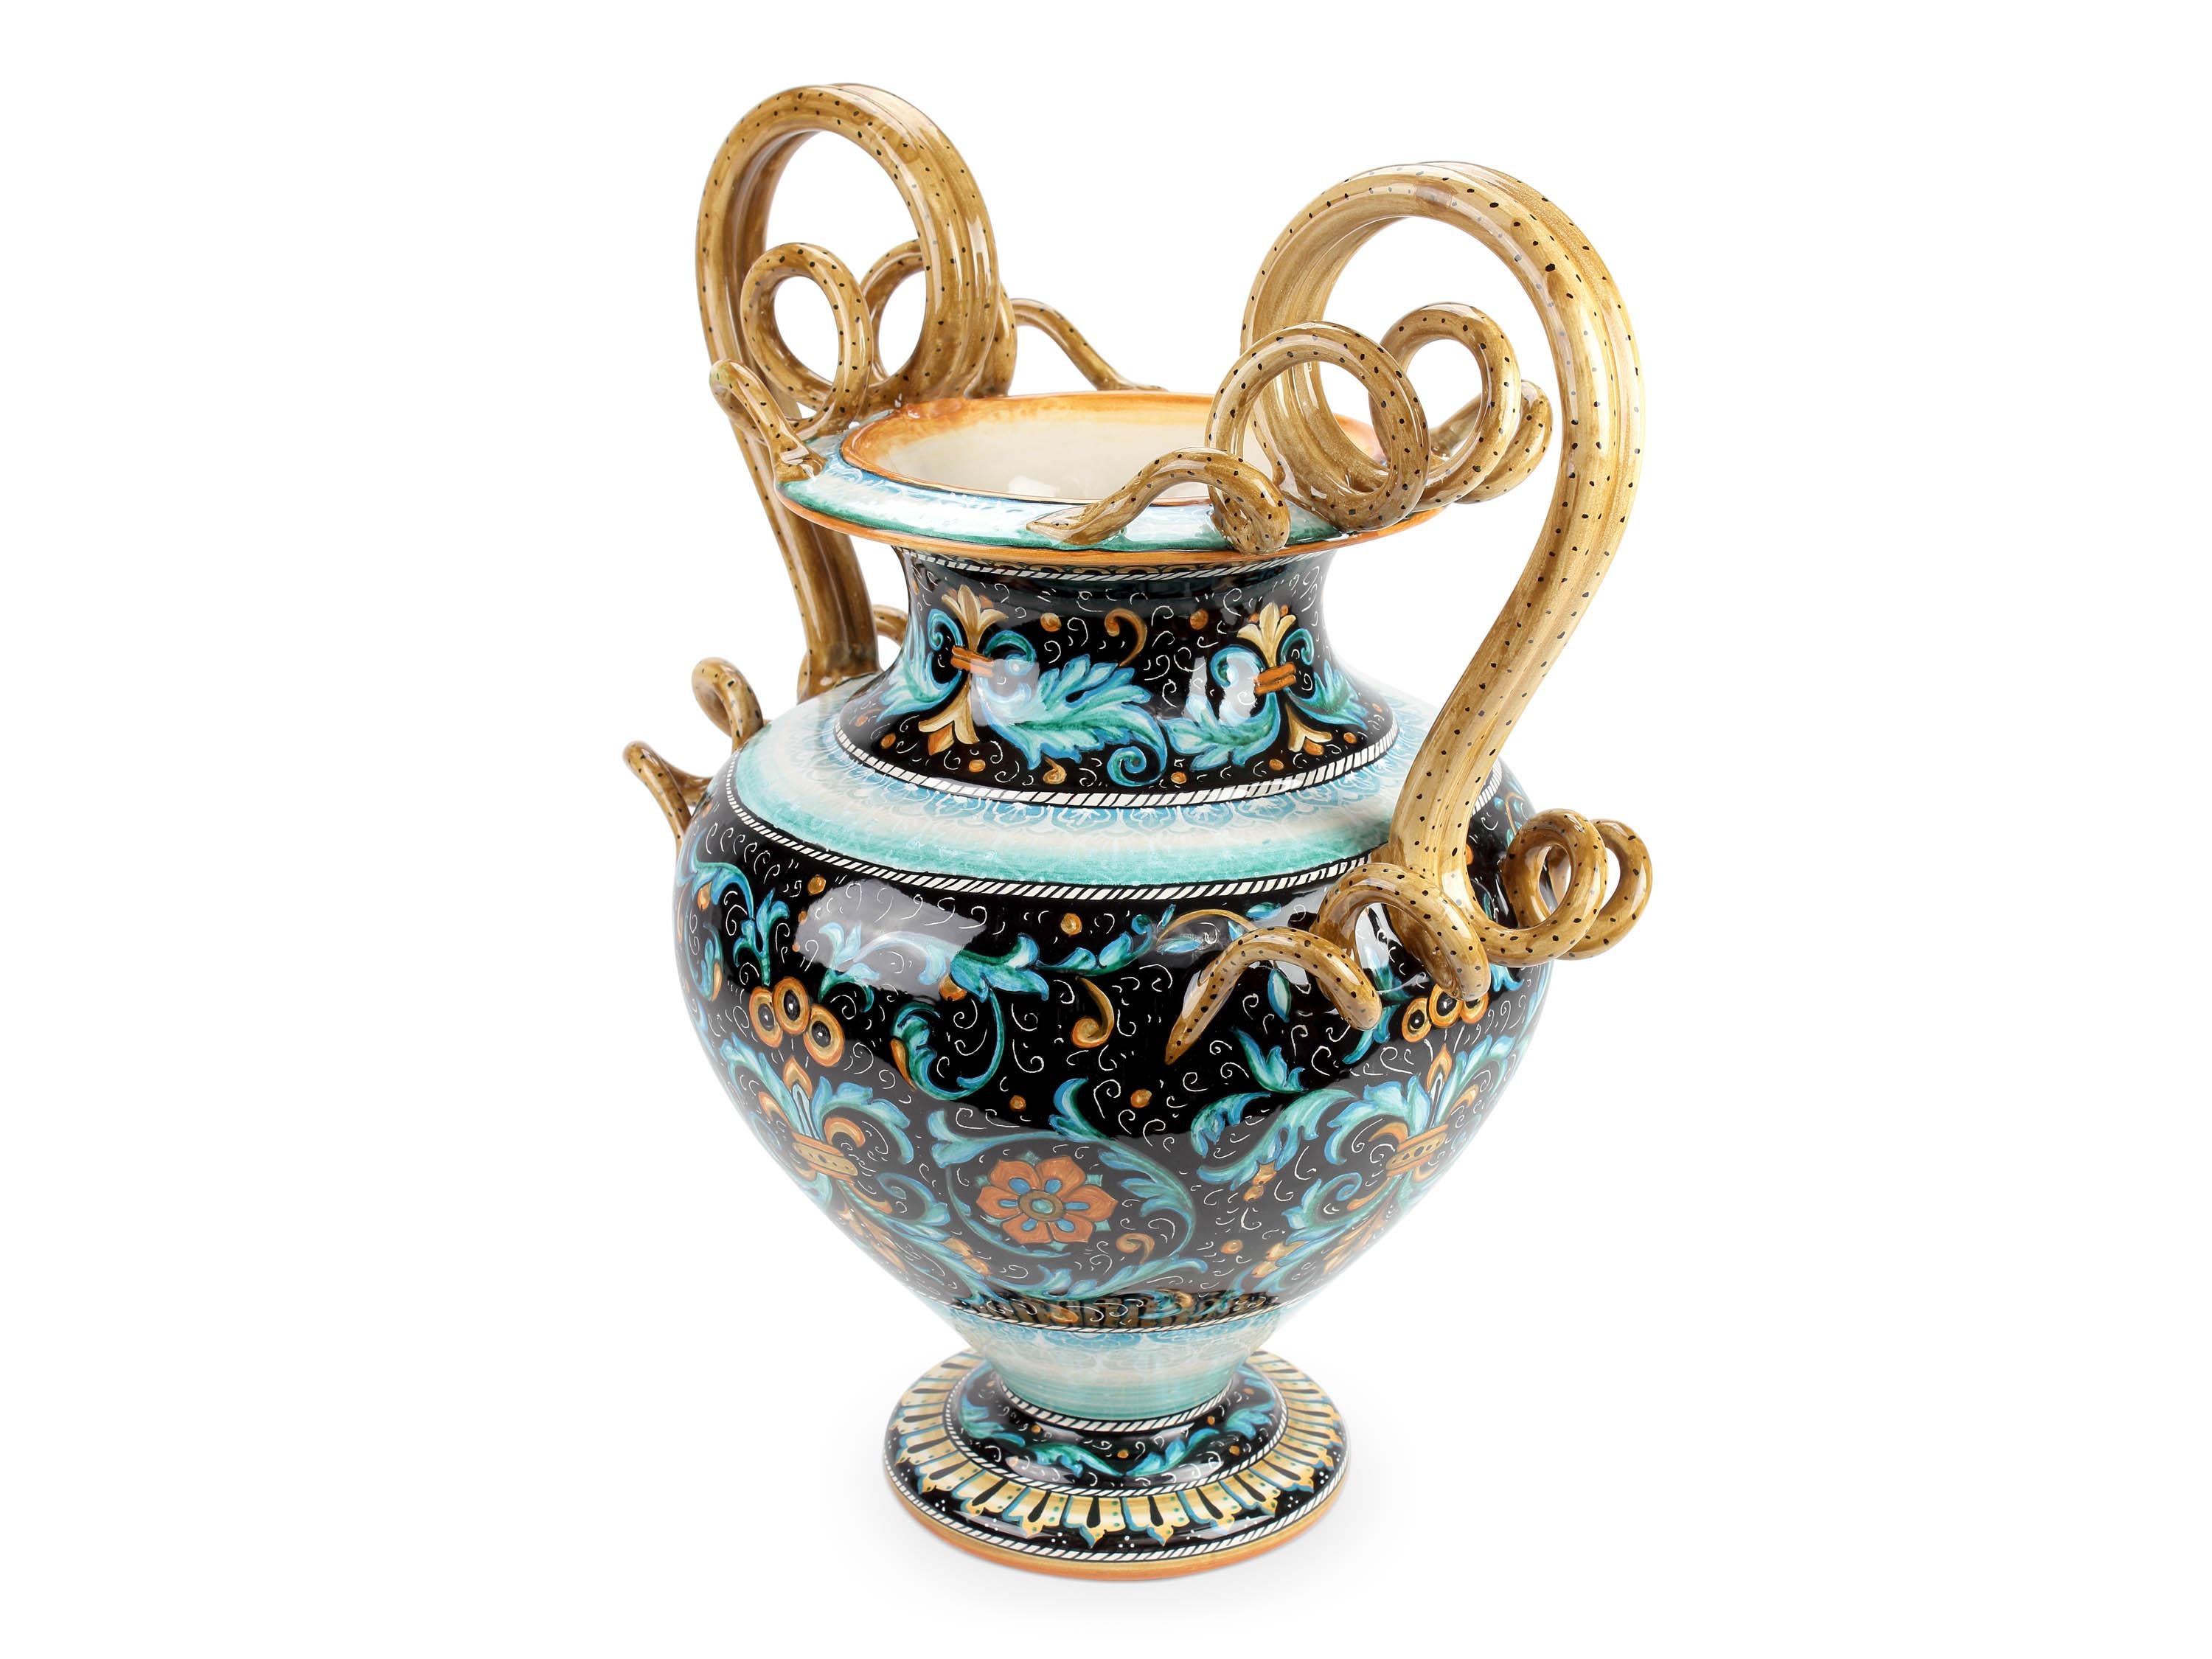 Amphora in majolica handmade in Italy and hand-painted in polychrome, decorated with a reinterpretation of the patterns used in Deruta during the Fifteenth Century, following the original Renaissance painting technique. The characteristic themes of